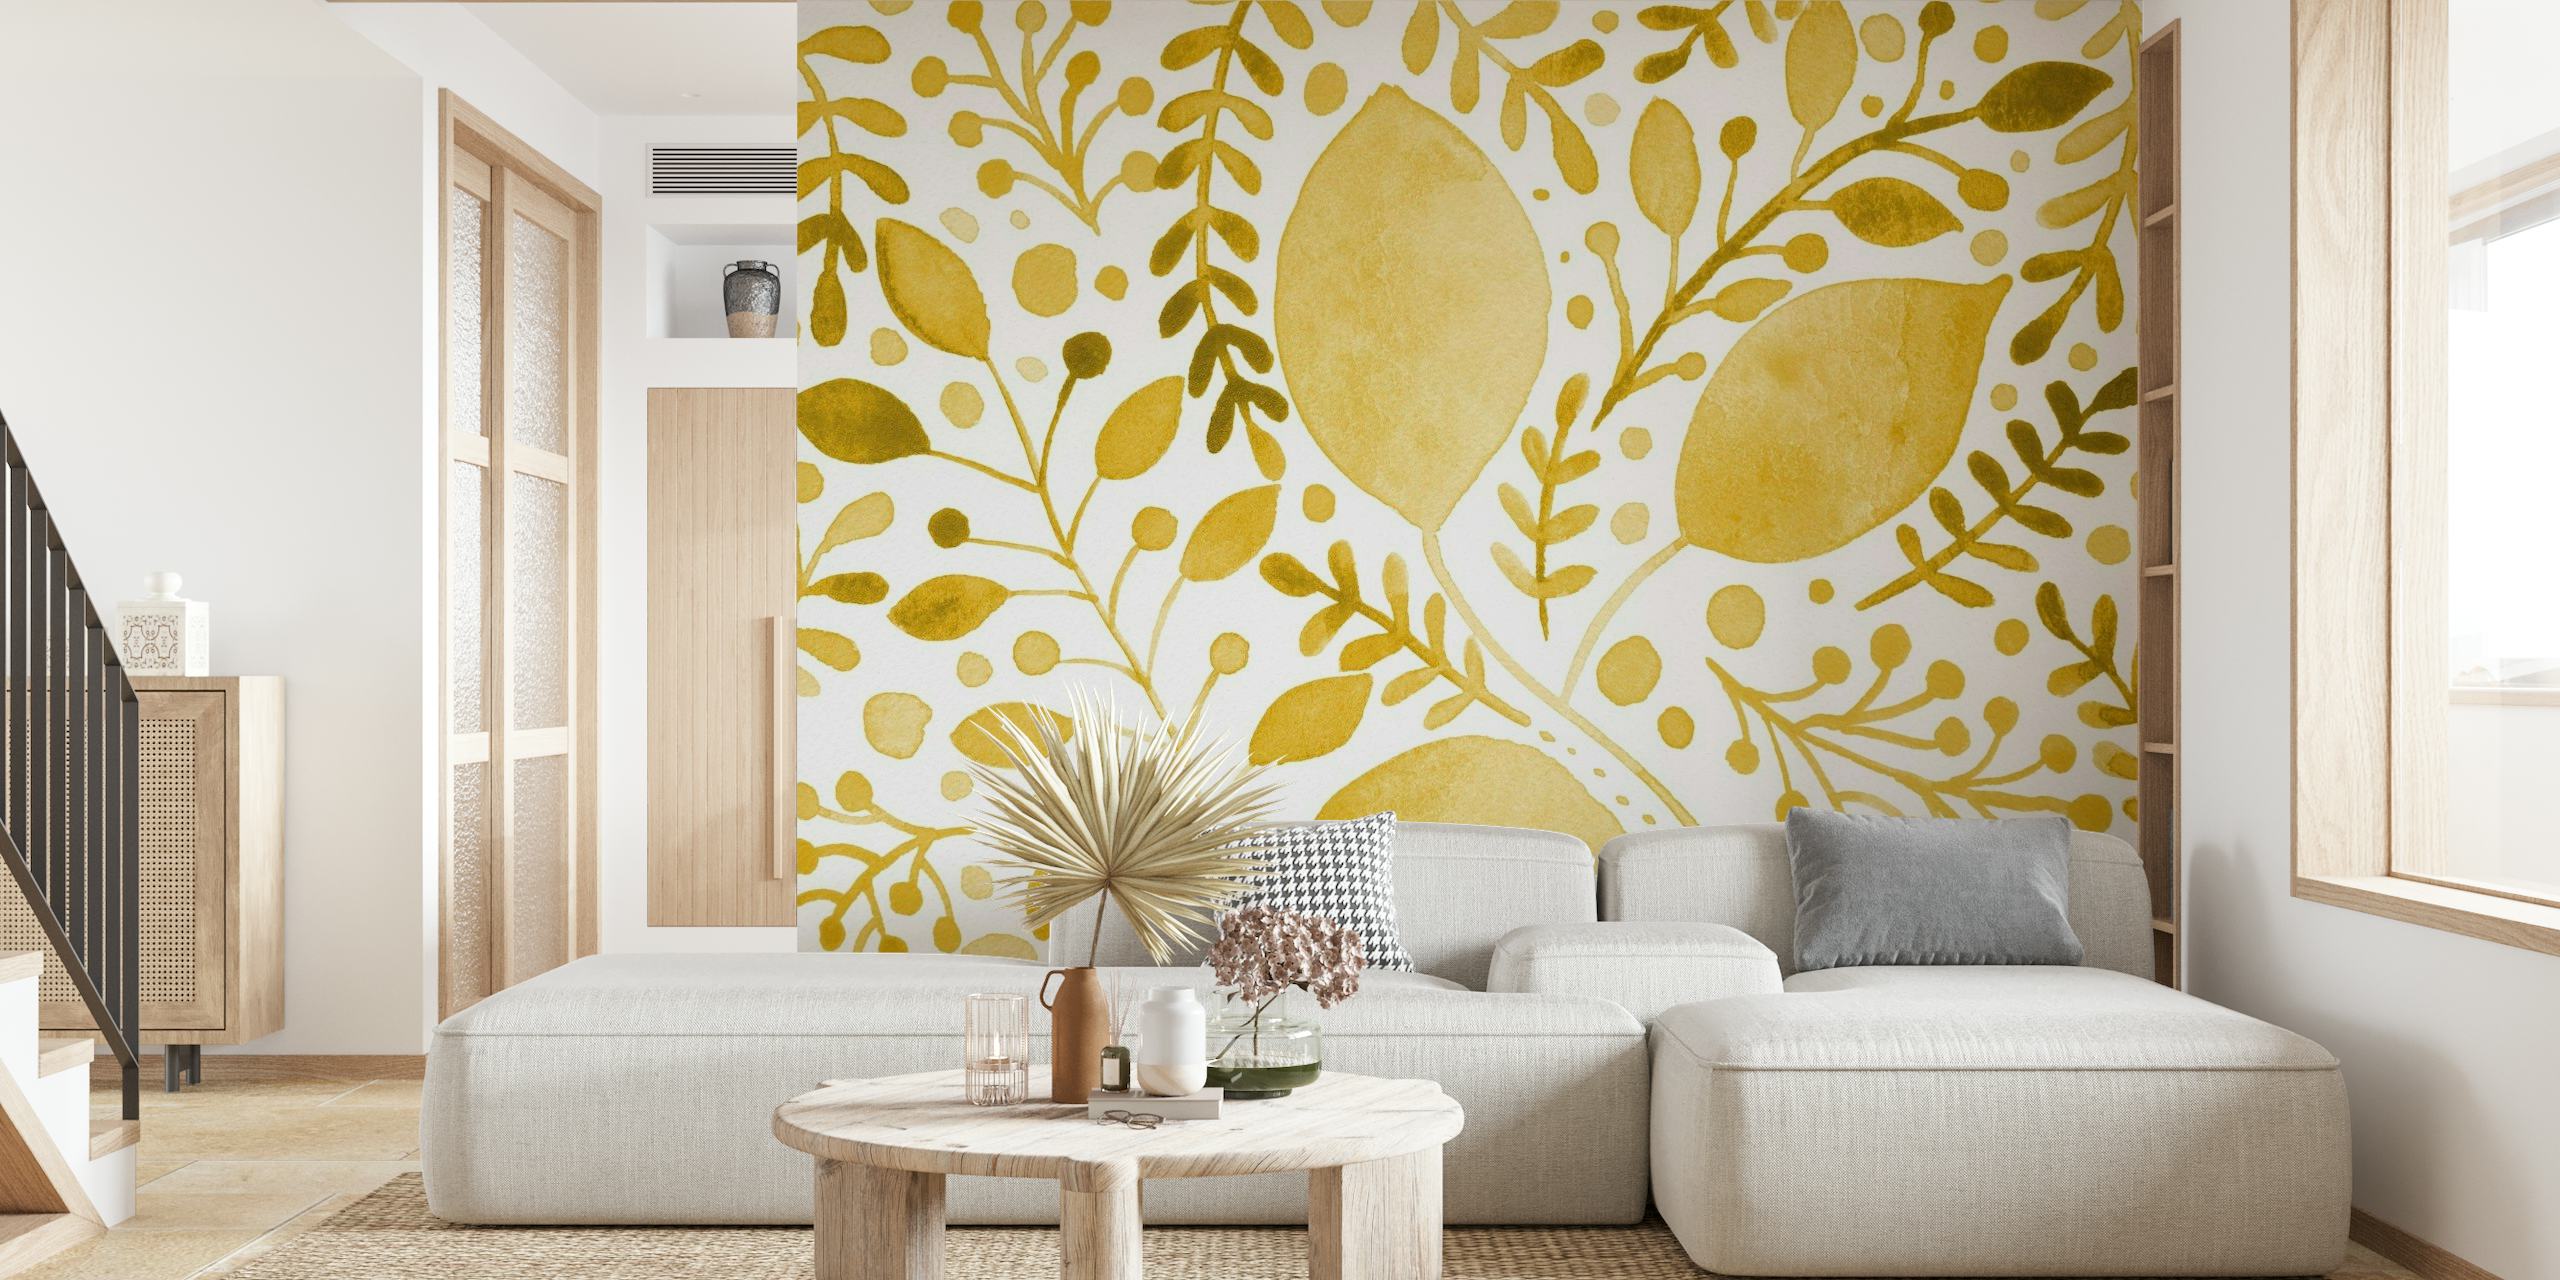 Watercolor branches with yellow leaves wall mural